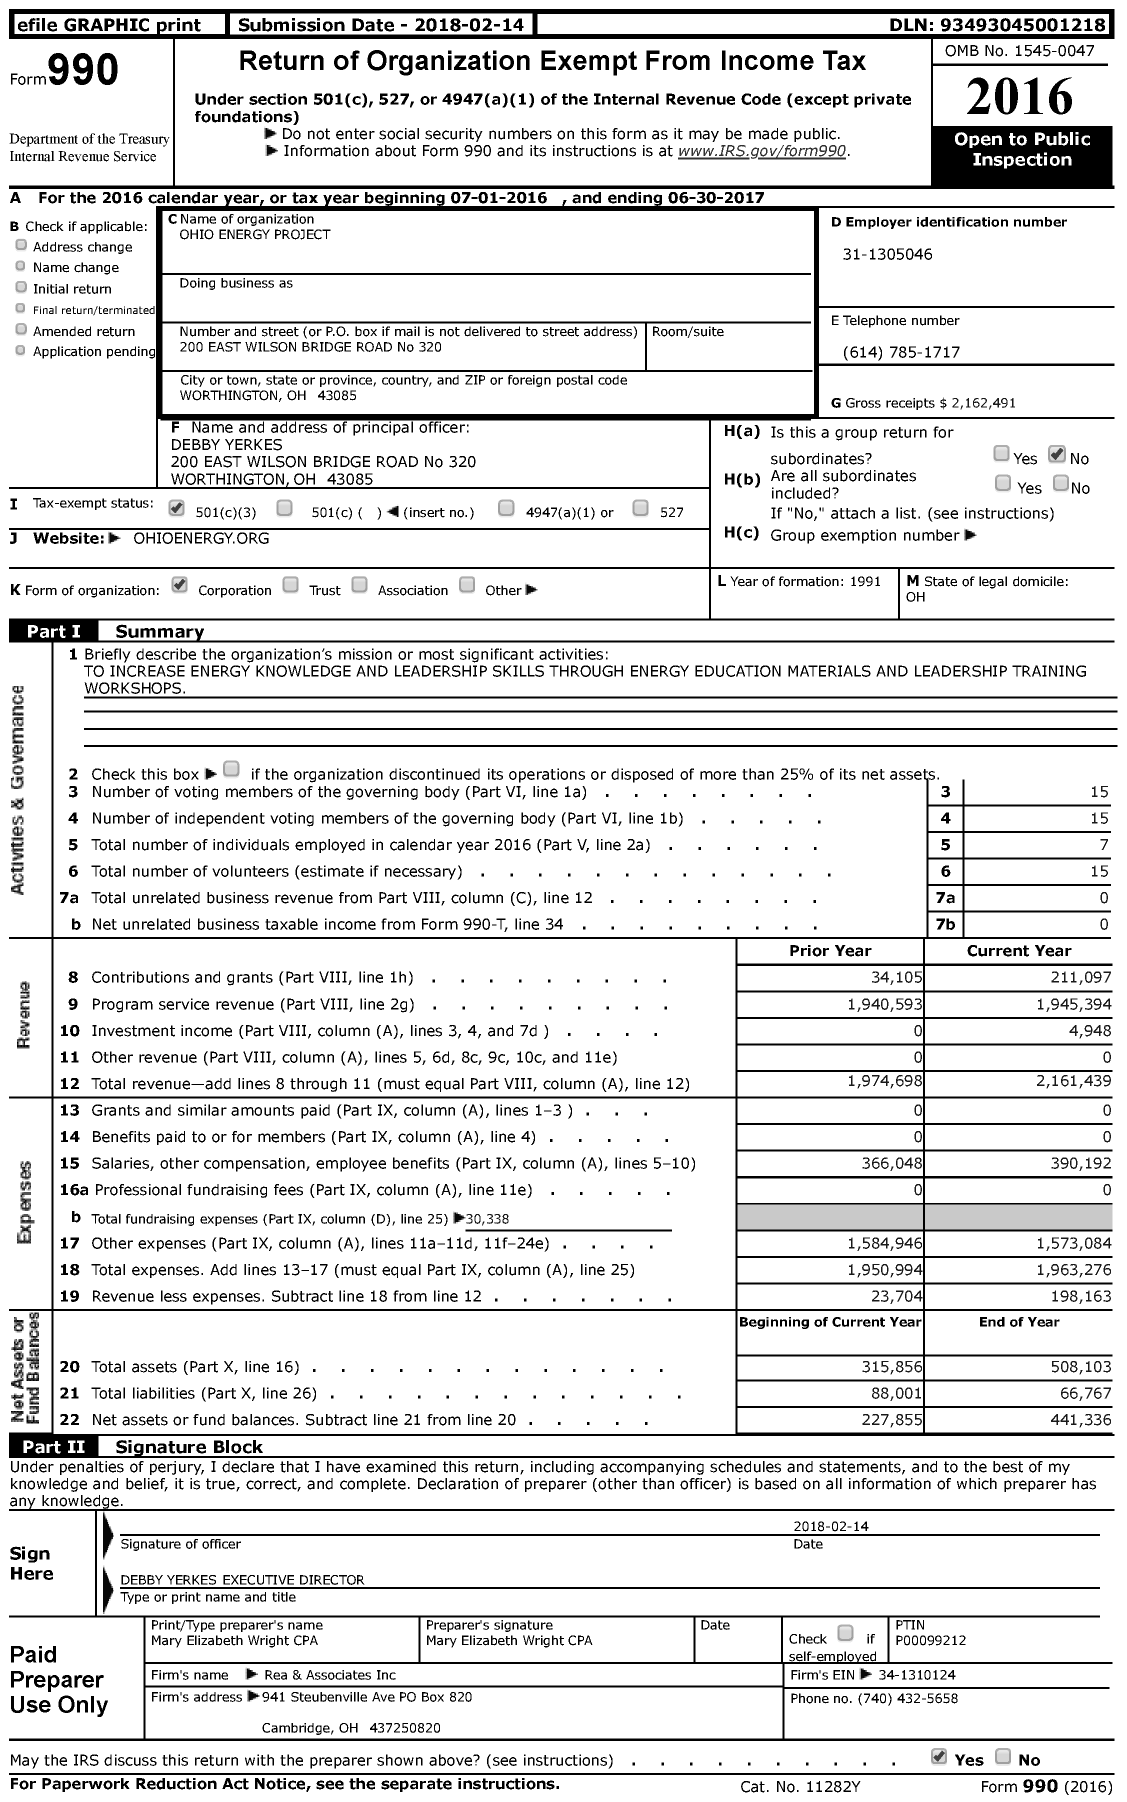 Image of first page of 2016 Form 990 for Ohio Energy Project (OEP)